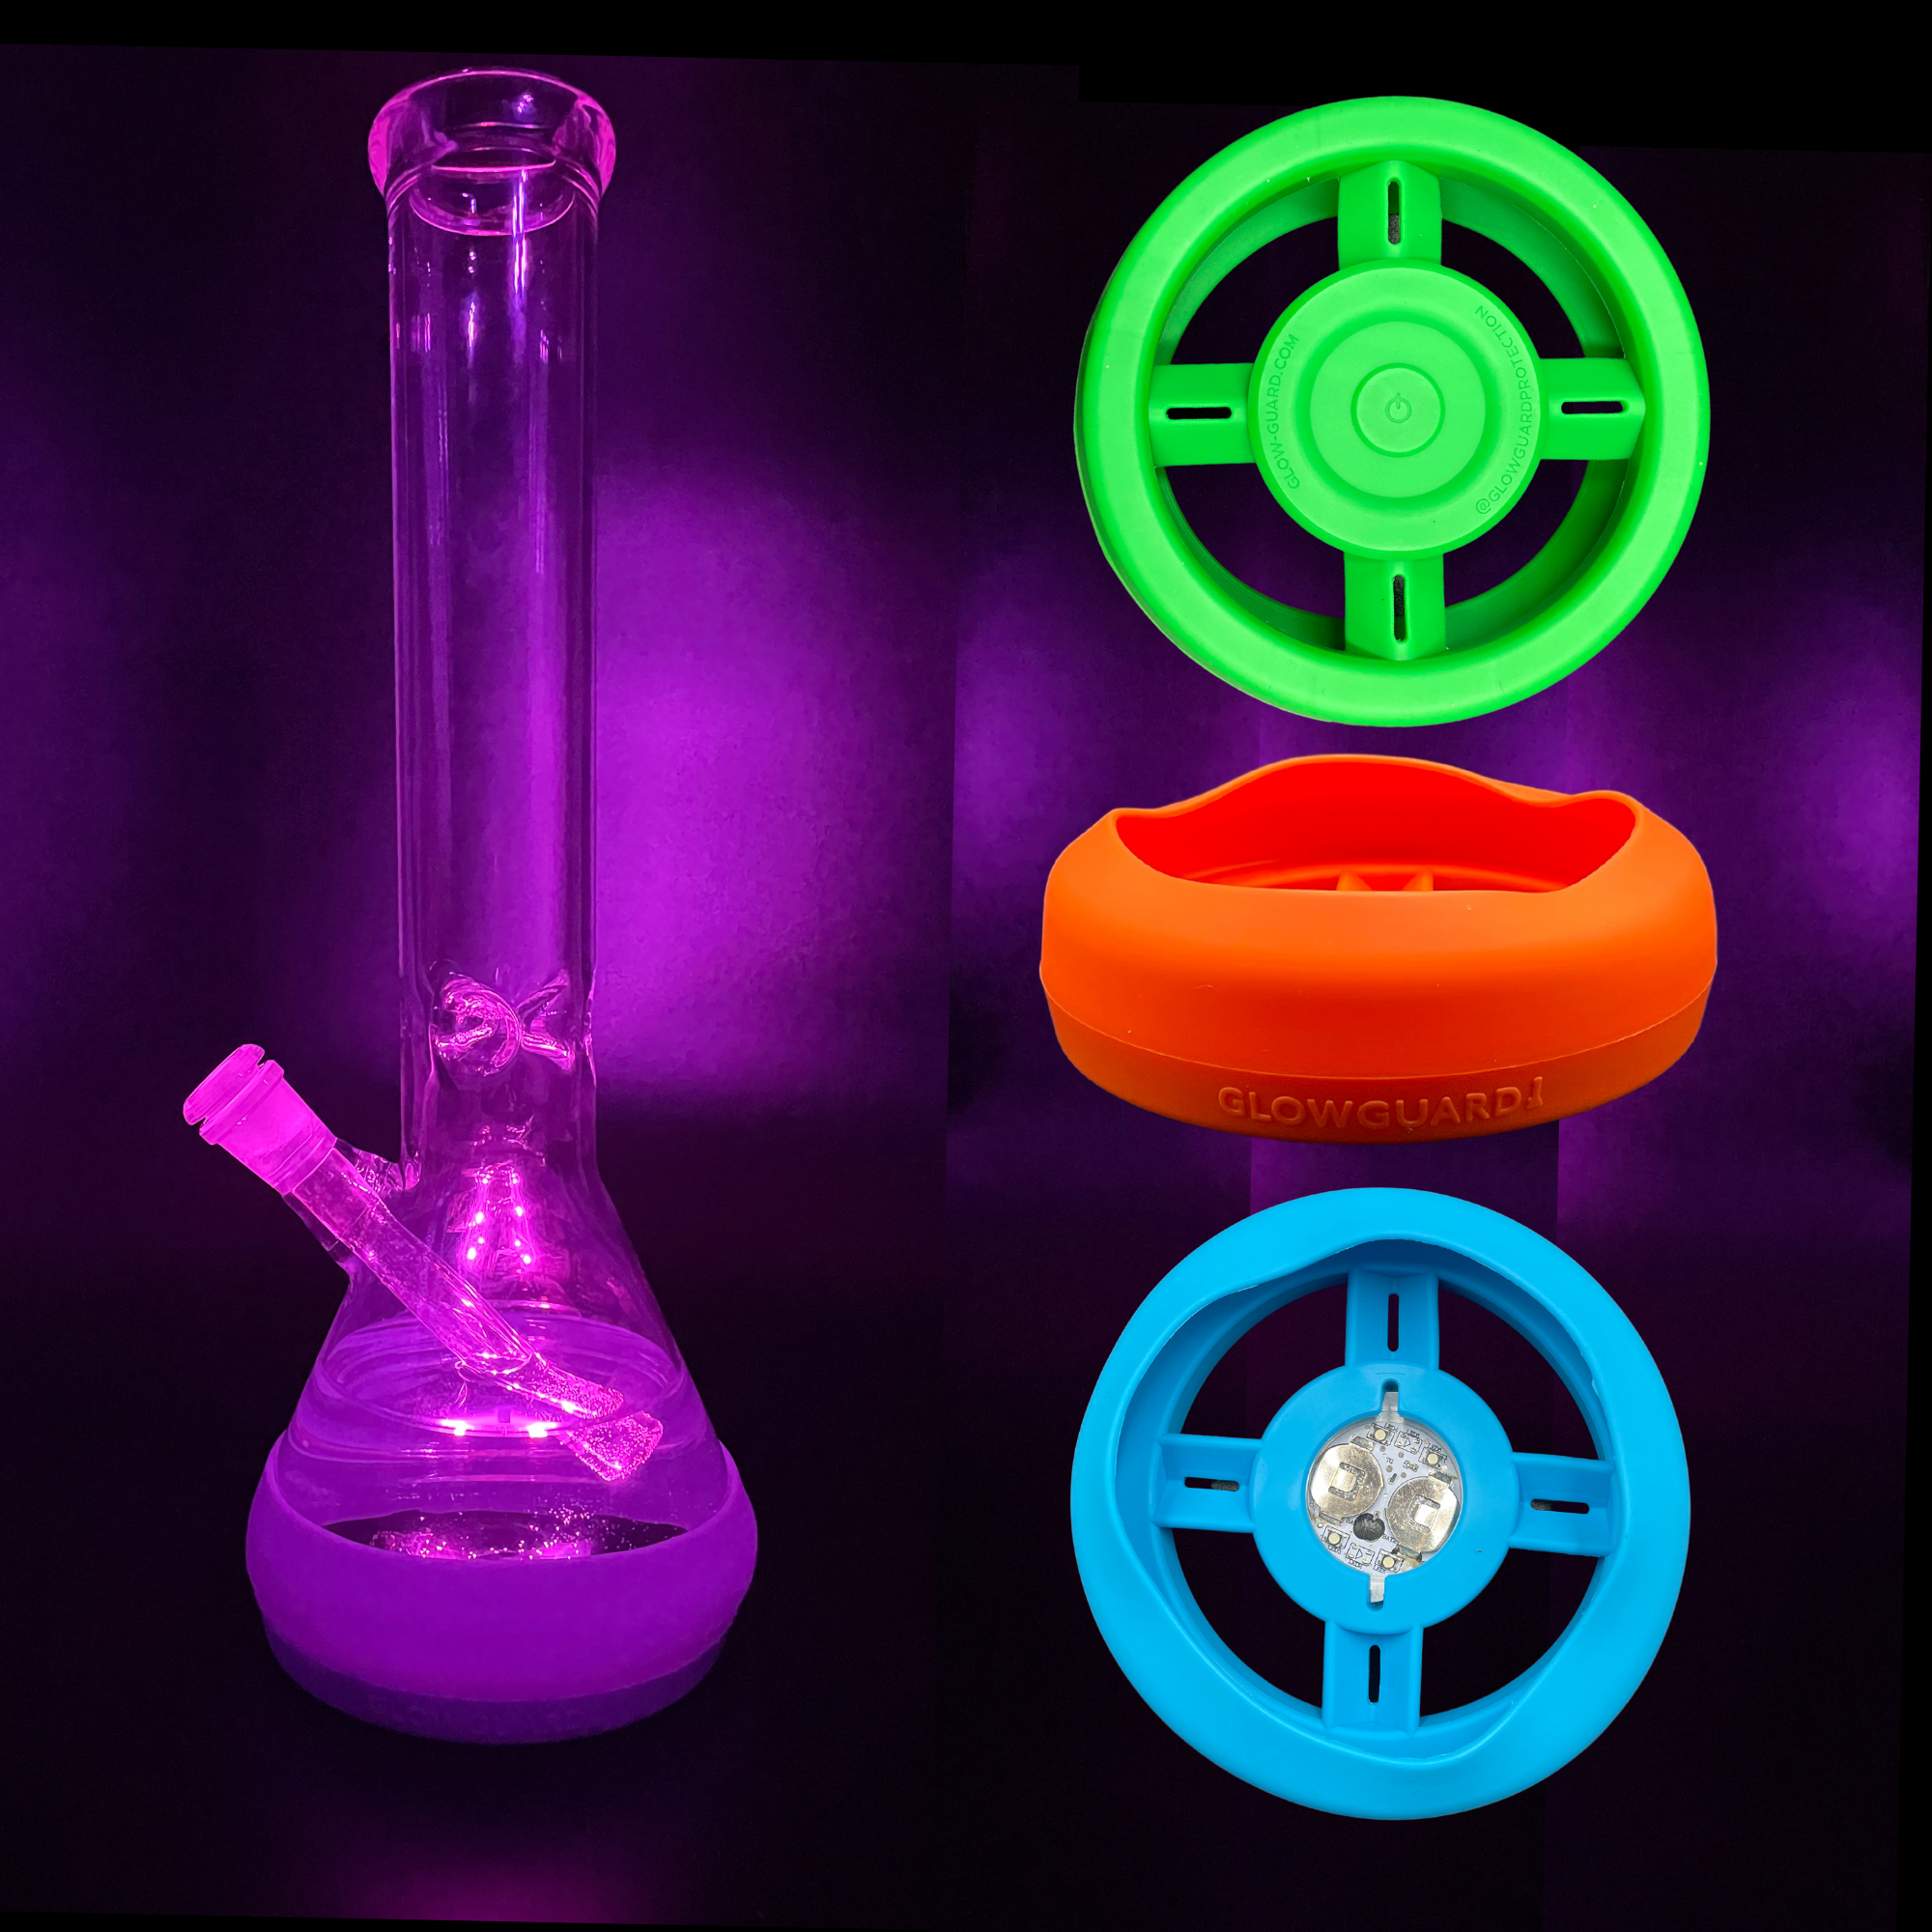 Glass Base Bumper USB Rechargeable 4.25in-6in Bases Silicone Fits Variety of Shapes